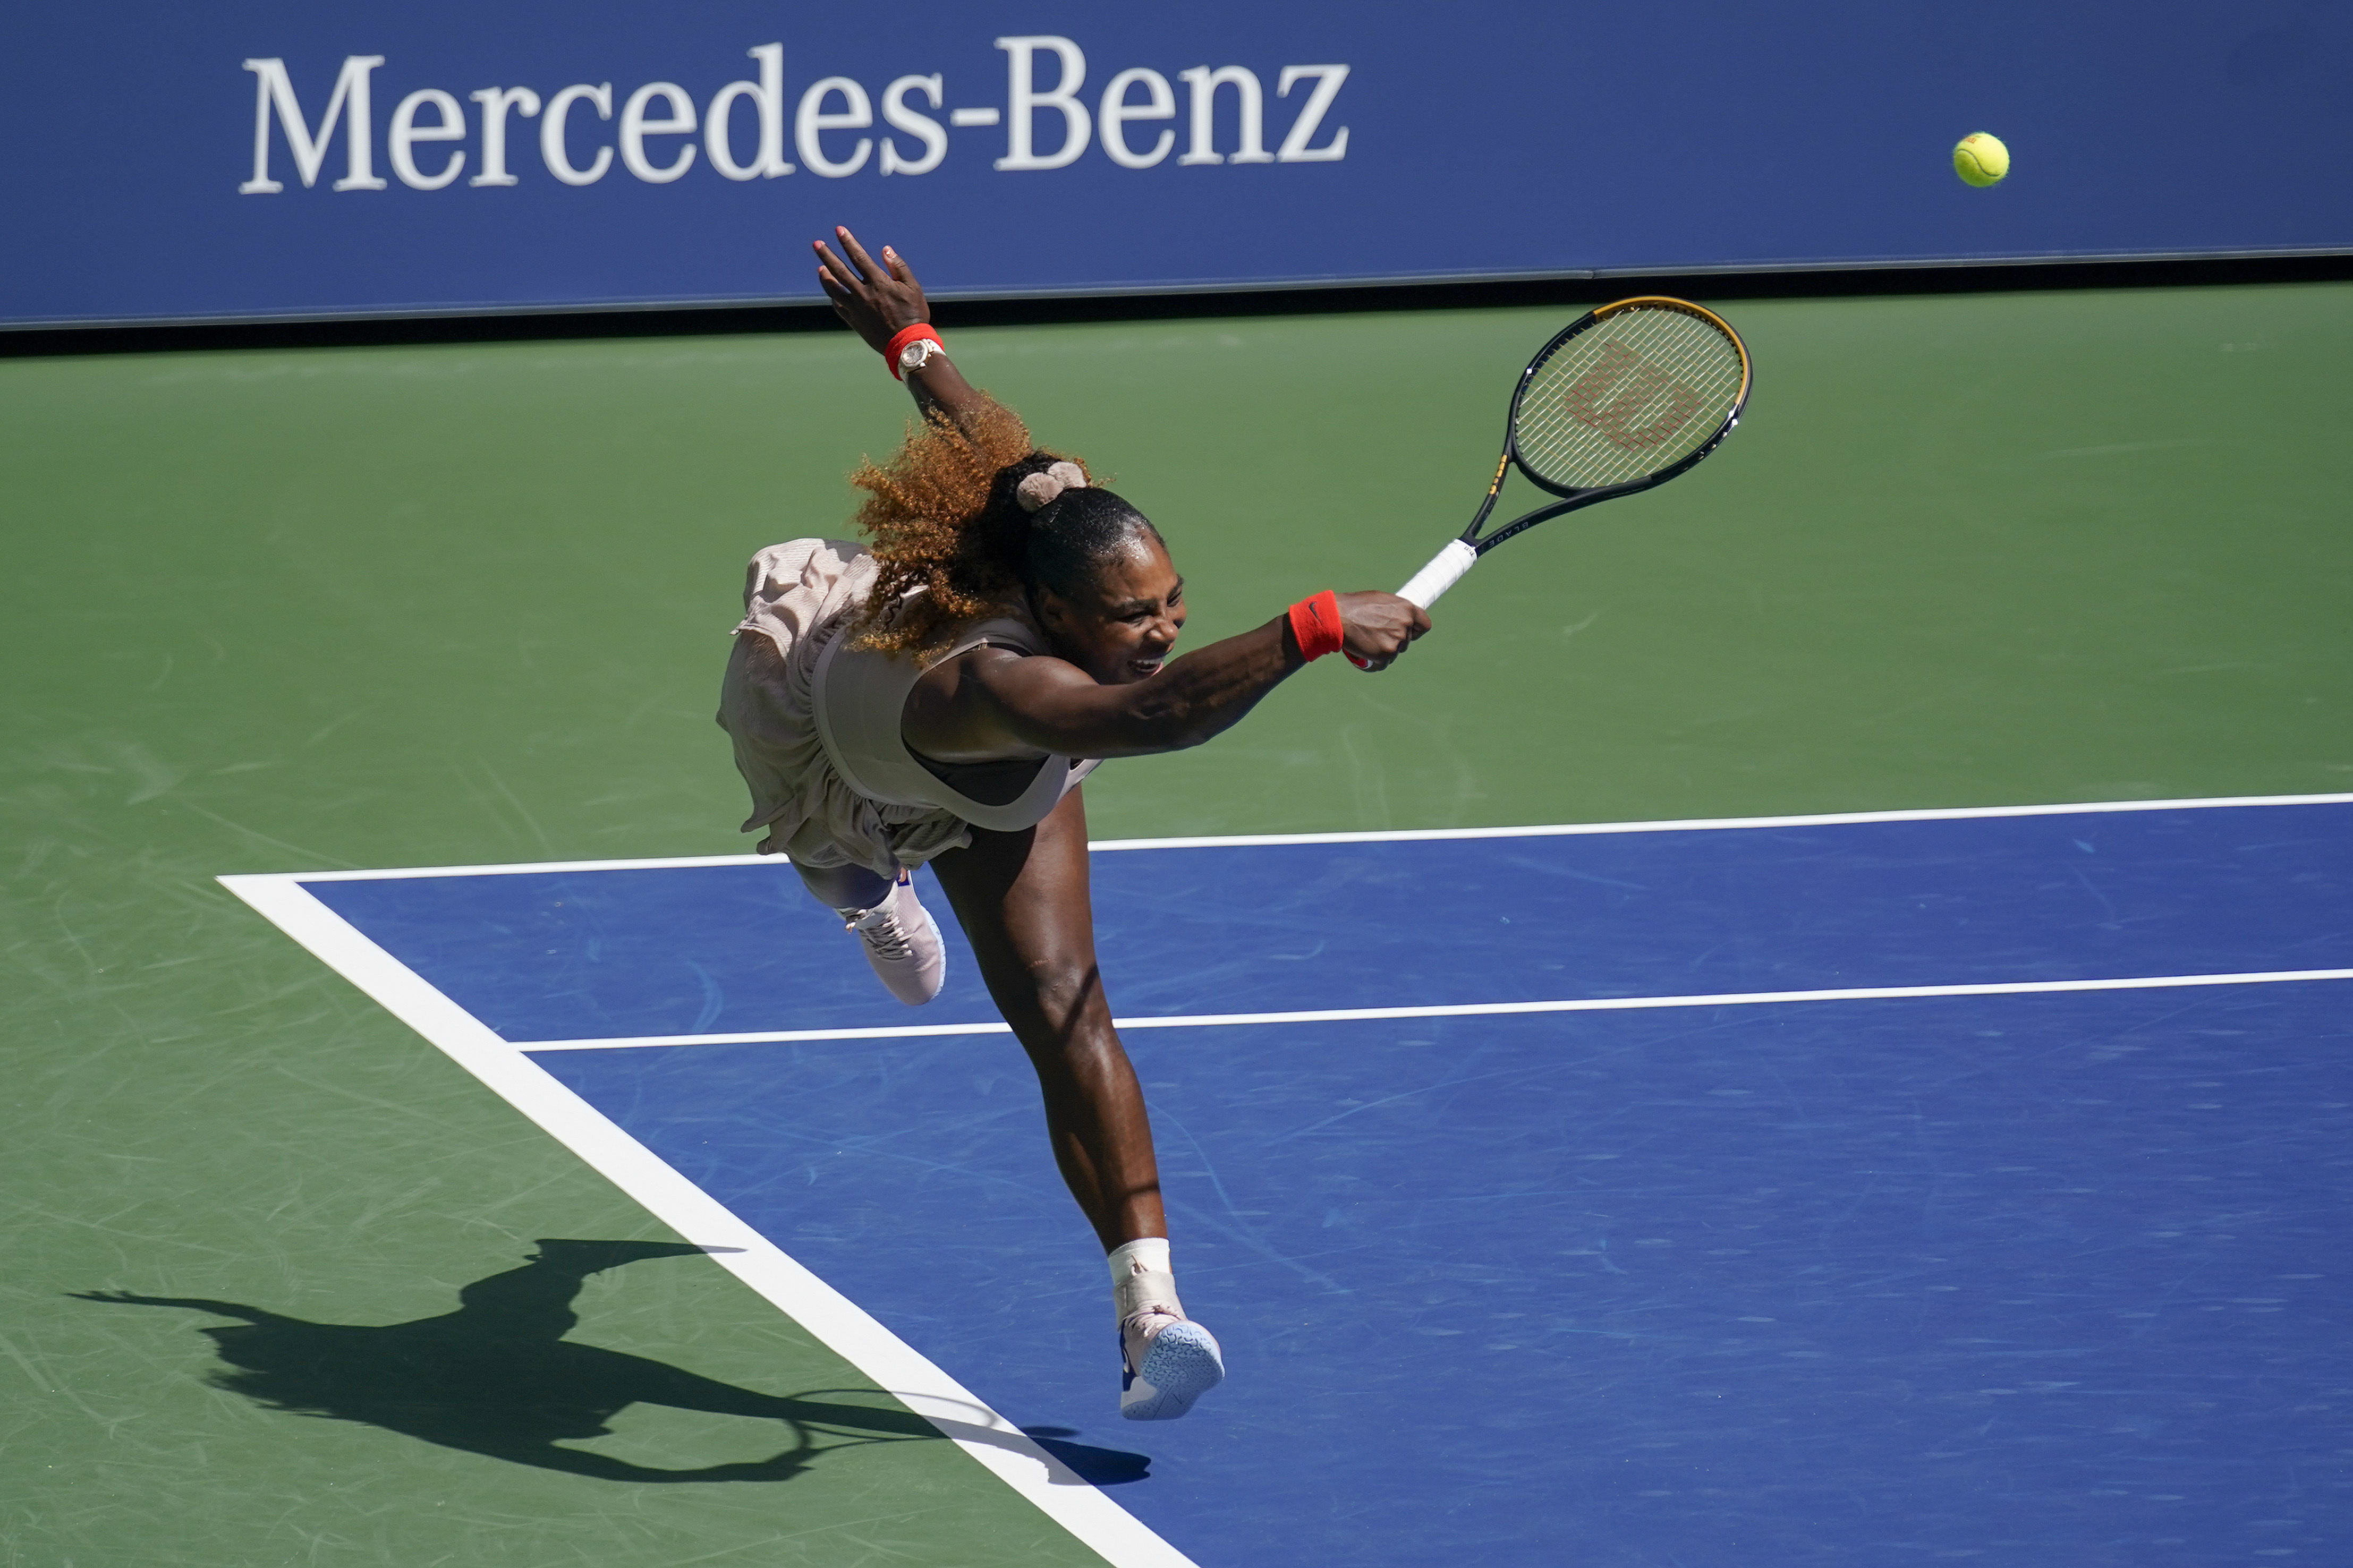 How to watch US Open 2020 final rounds without cable Free live streams, TV info Serena Williams, Dominic Thiem